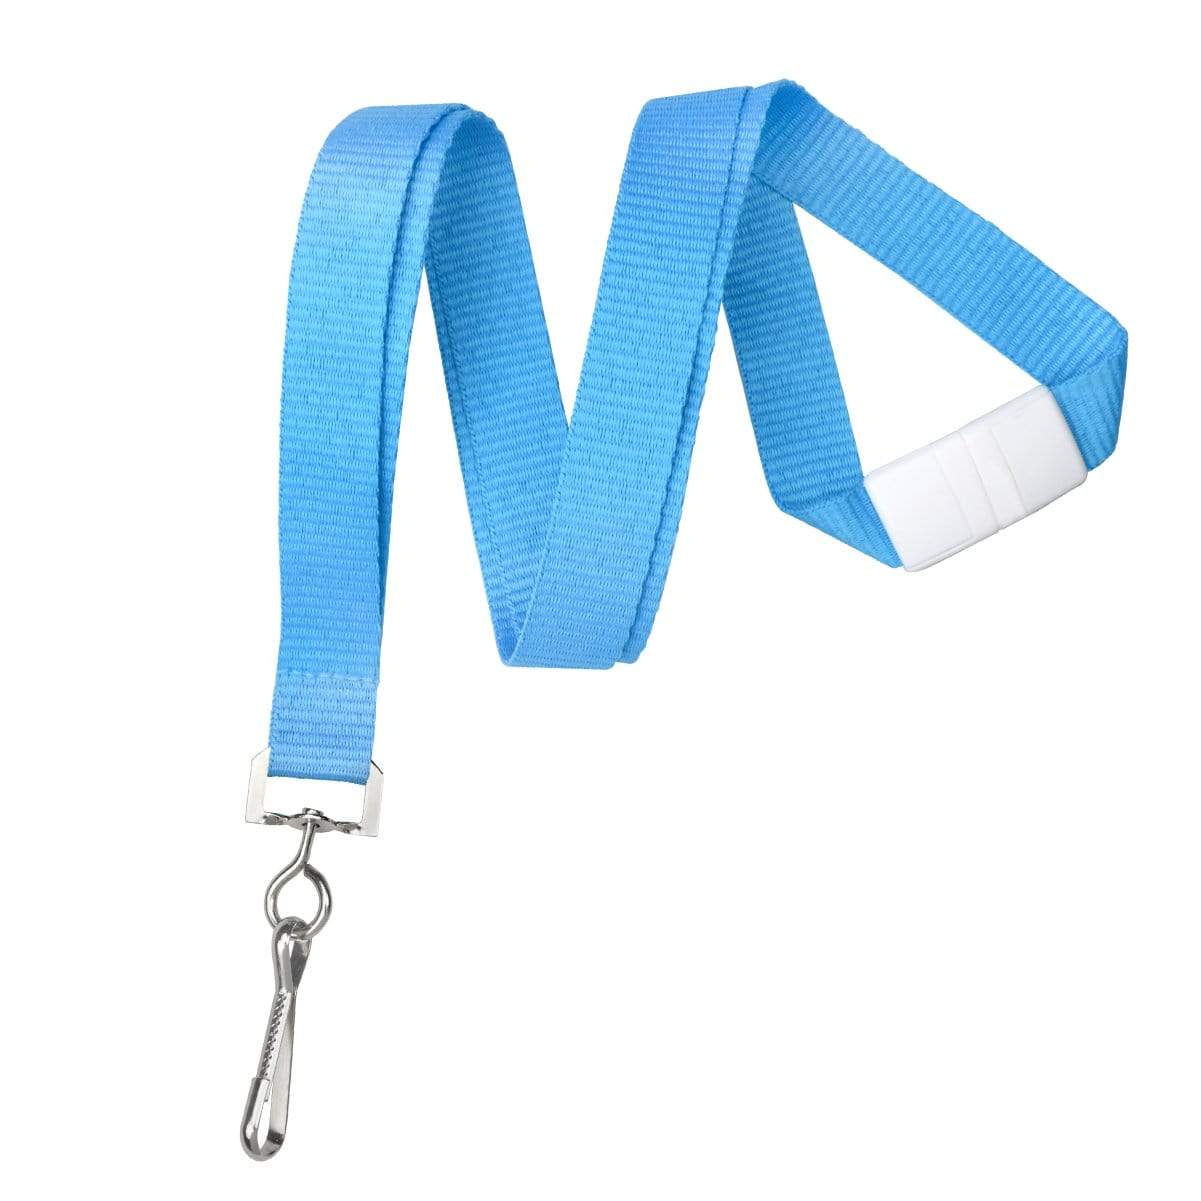 Neon Blue Neon Lanyard with Safety Breakaway Clasp - Bright Soft Lanyards 2138-504X 2138-5043